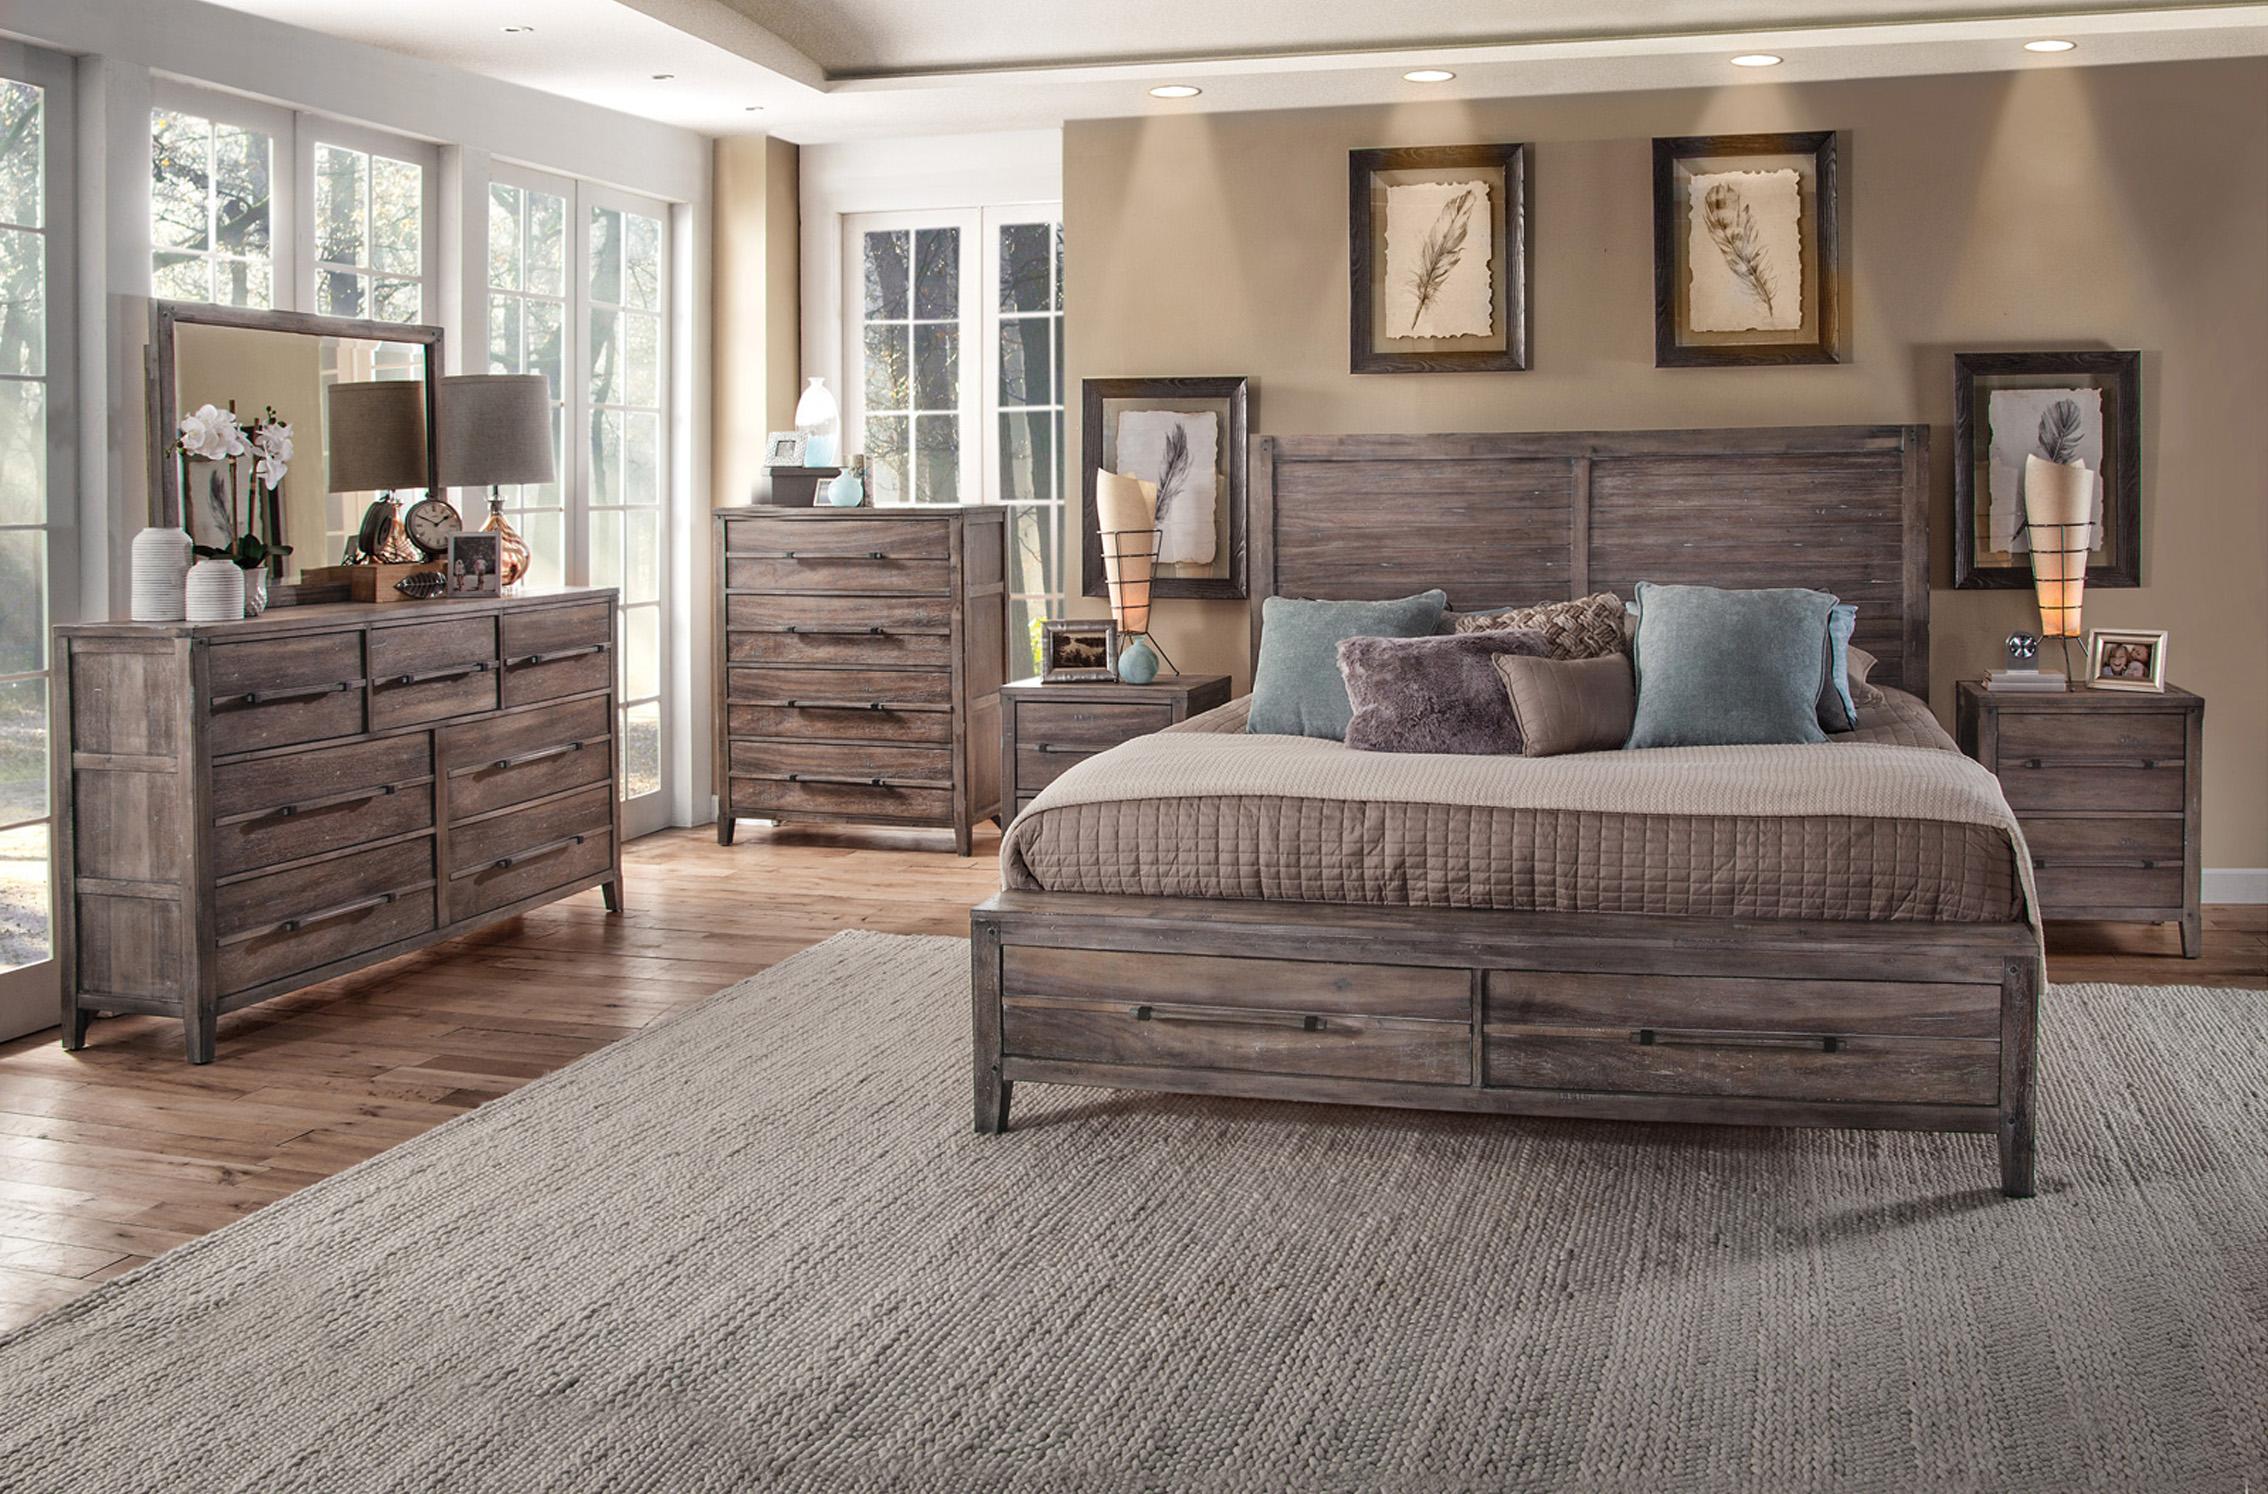 Classic, Traditional Panel Bedroom Set AURORA 2800-50PNST 2800-50PNST-2NDM-5PC in Driftwood, Gray 